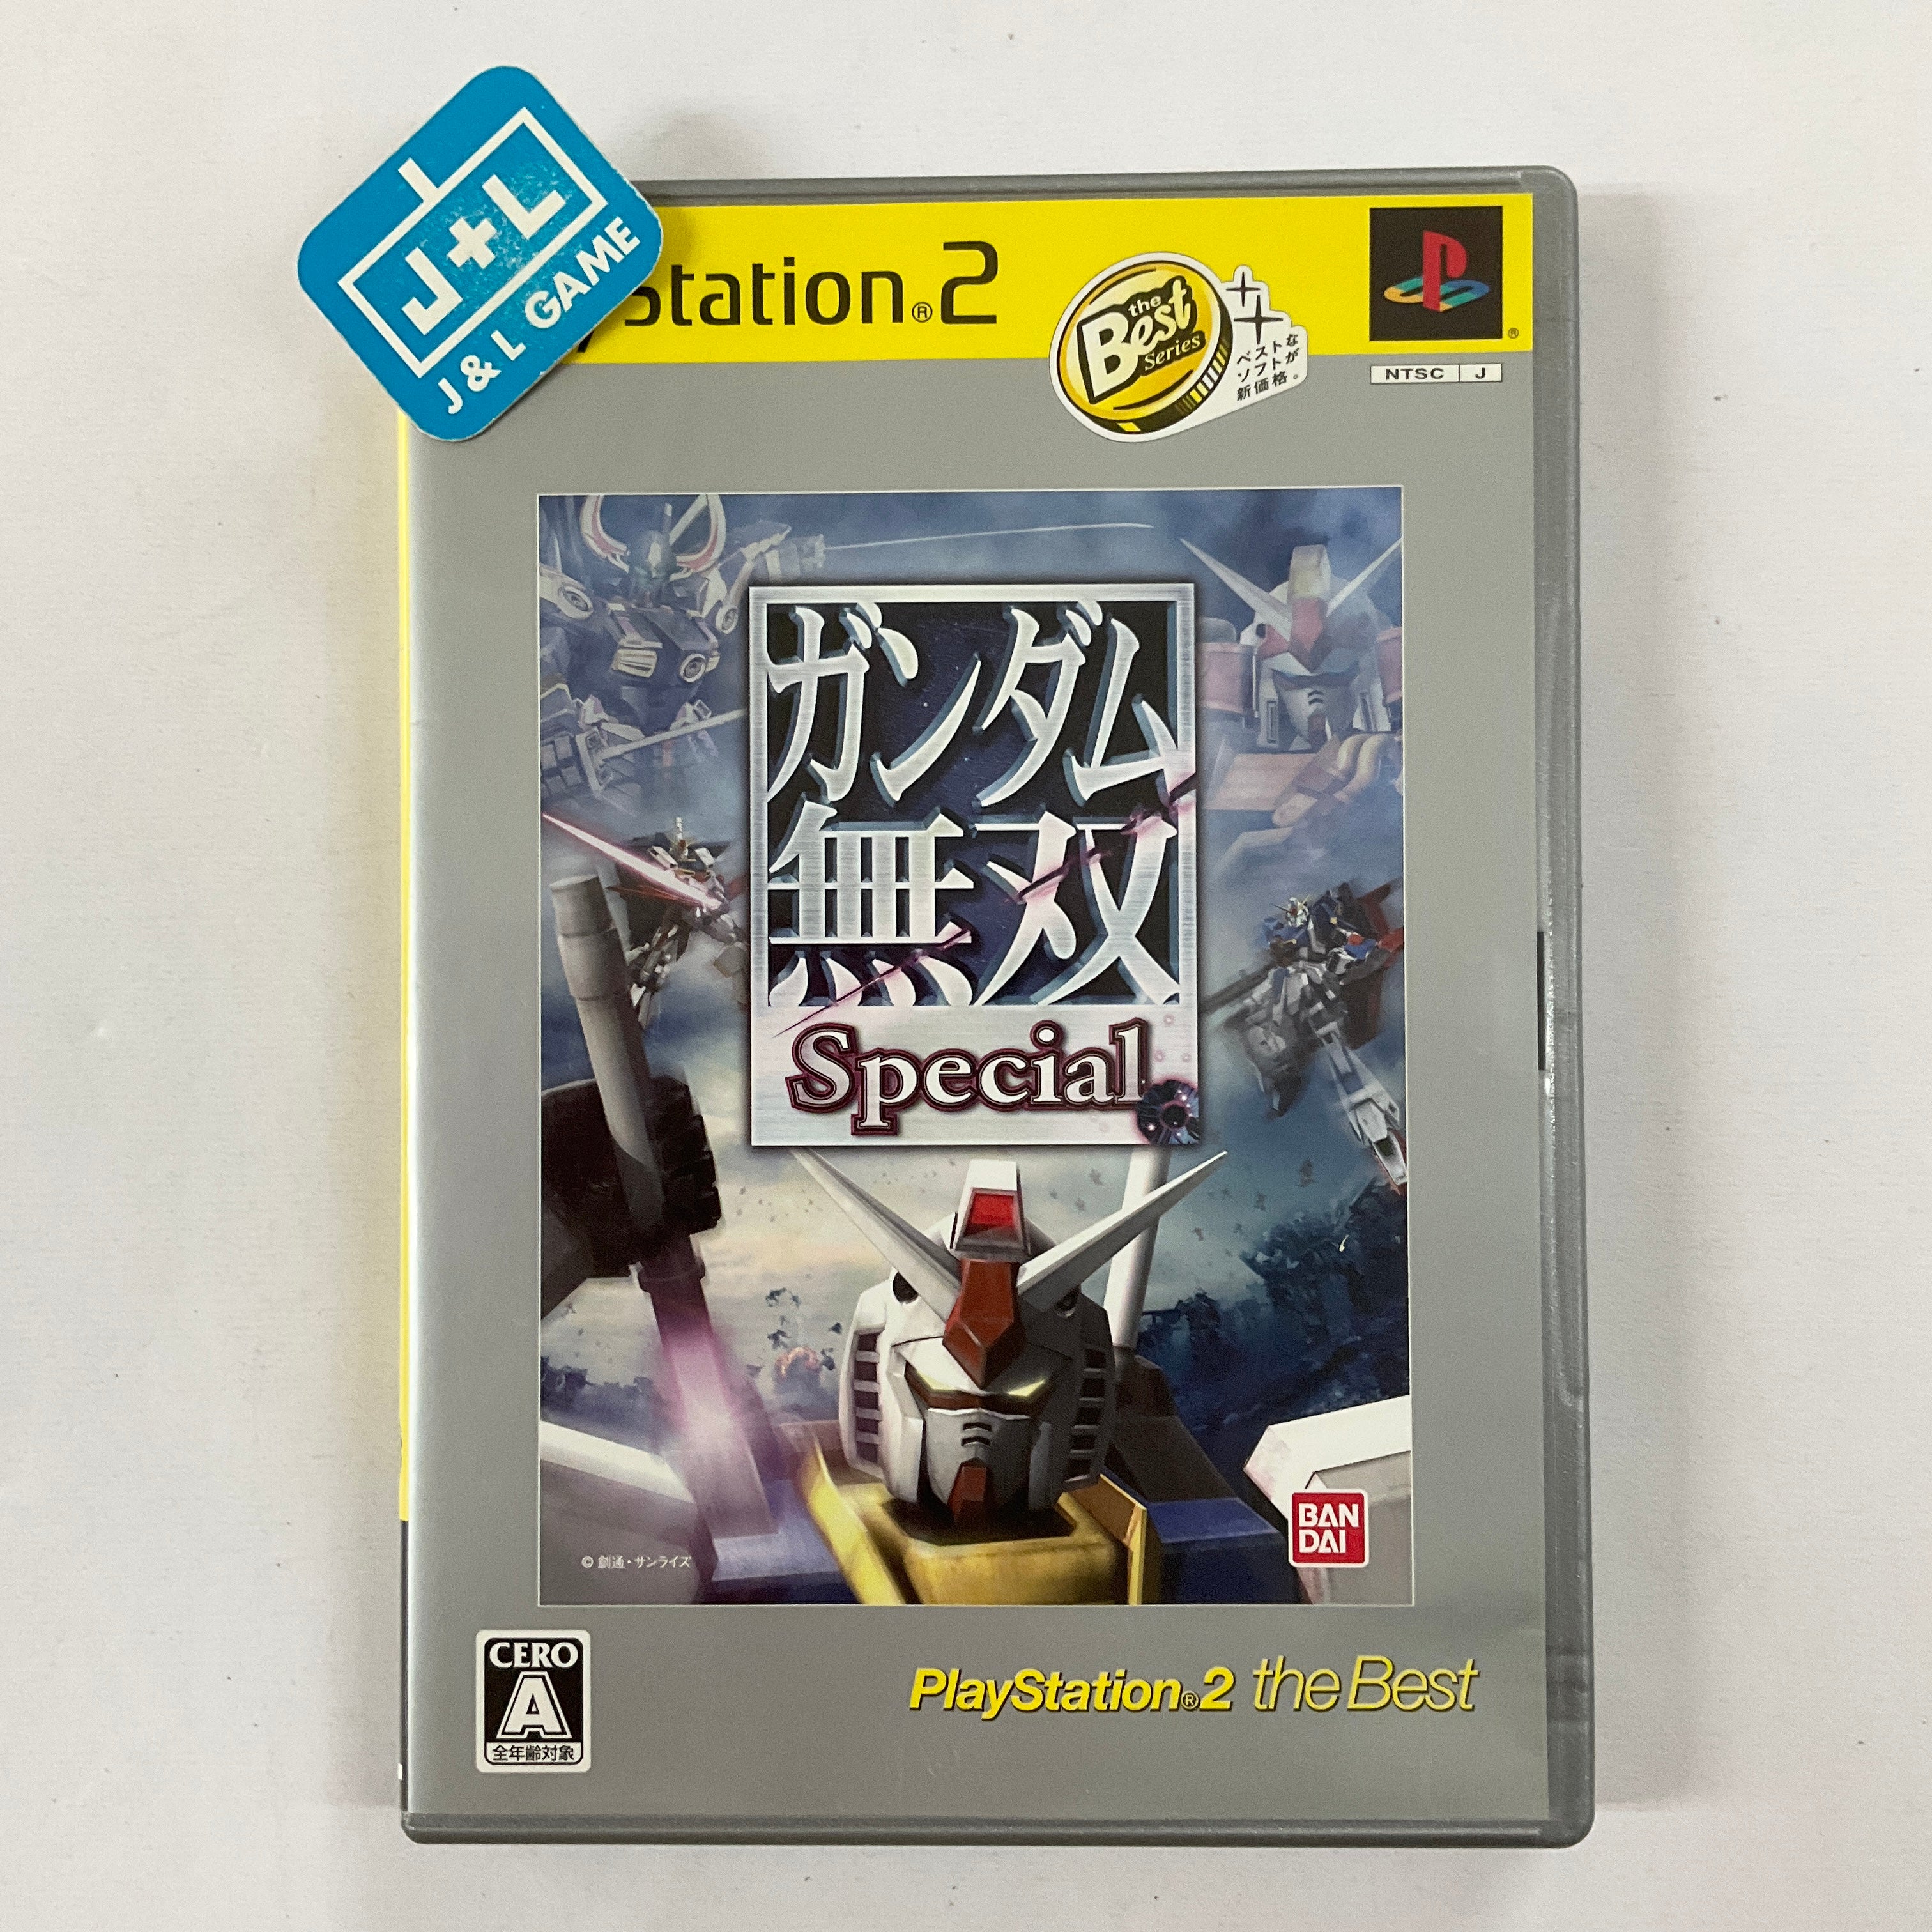 Gundam Musou Special (PlayStation 2 the Best) - (PS2) PlayStation 2 [Pre-Owned] (Japanese Import) Video Games Bandai   